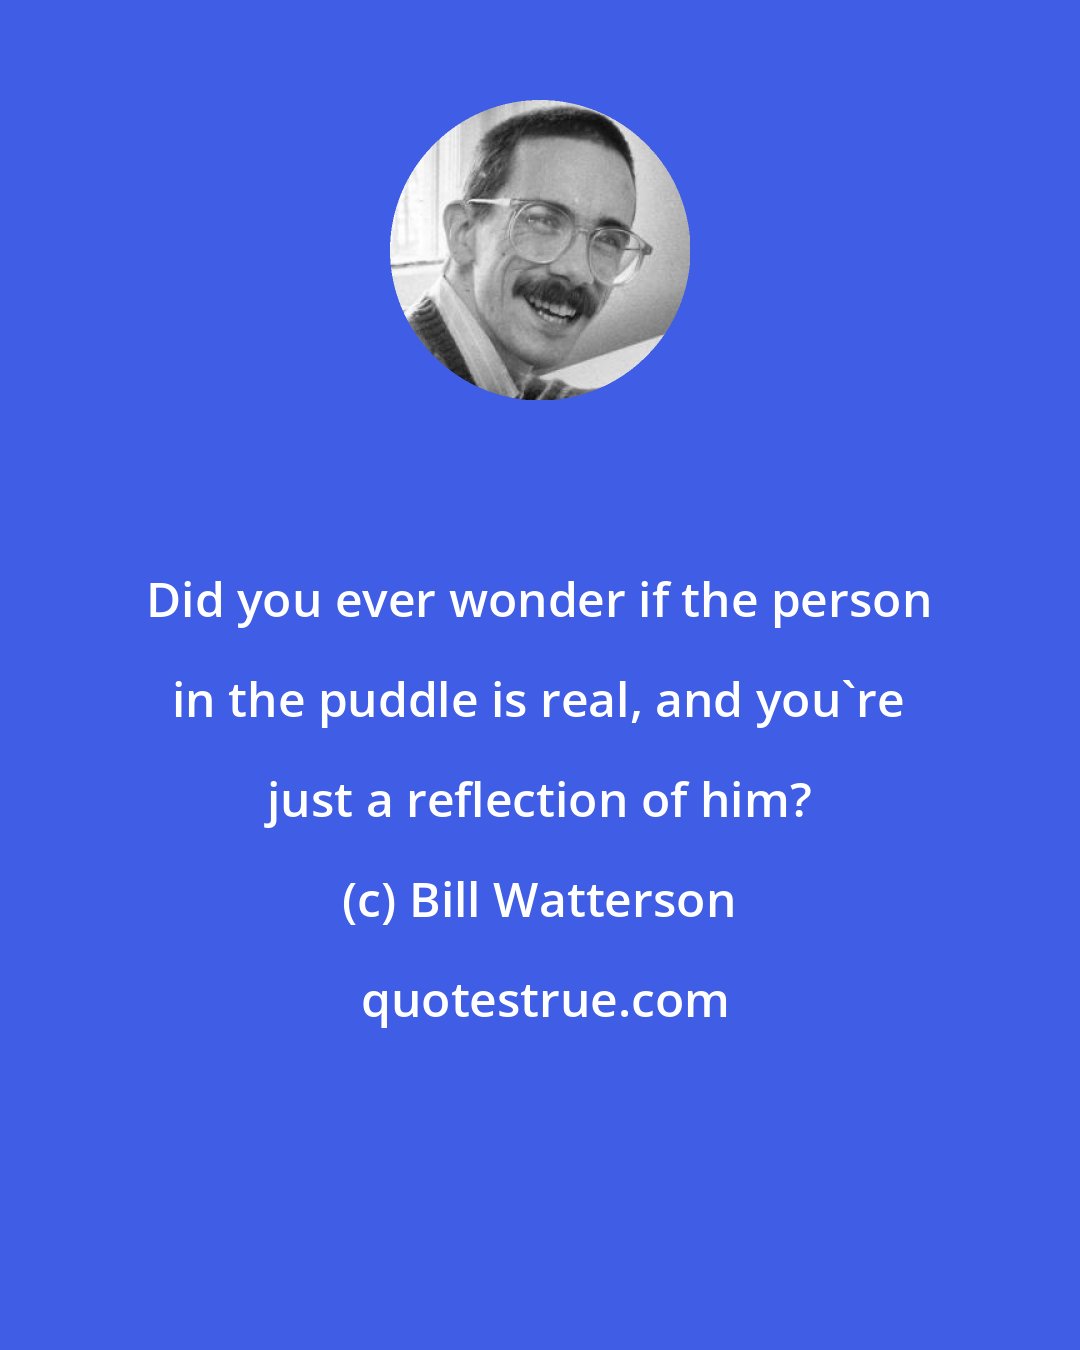 Bill Watterson: Did you ever wonder if the person in the puddle is real, and you're just a reflection of him?